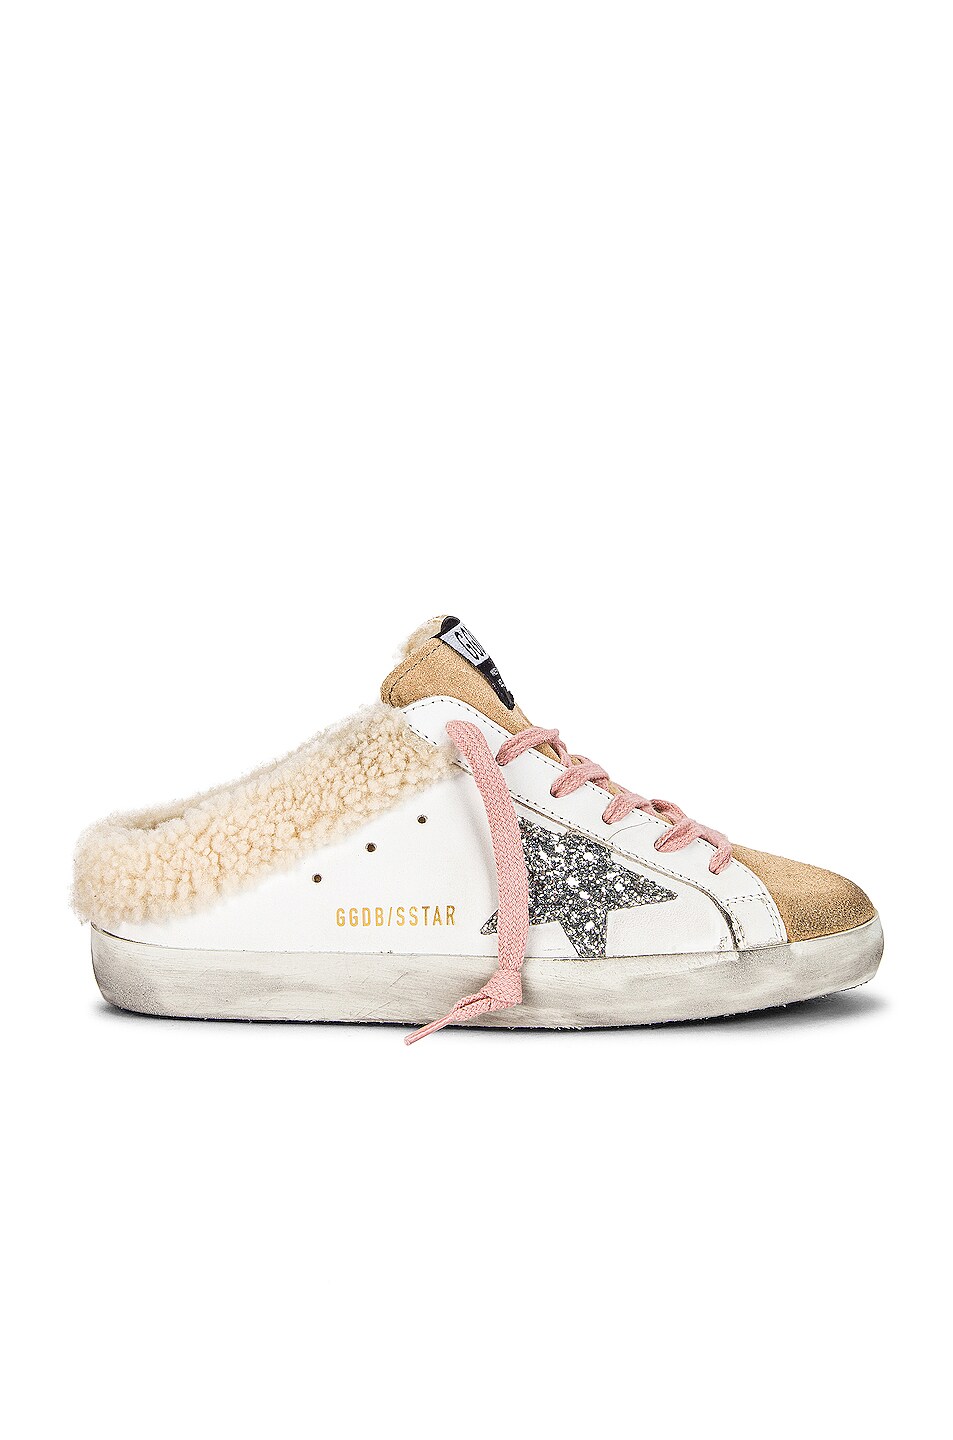 Image 1 of Golden Goose Sabot Sneaker in Cappuccino, White & Silver